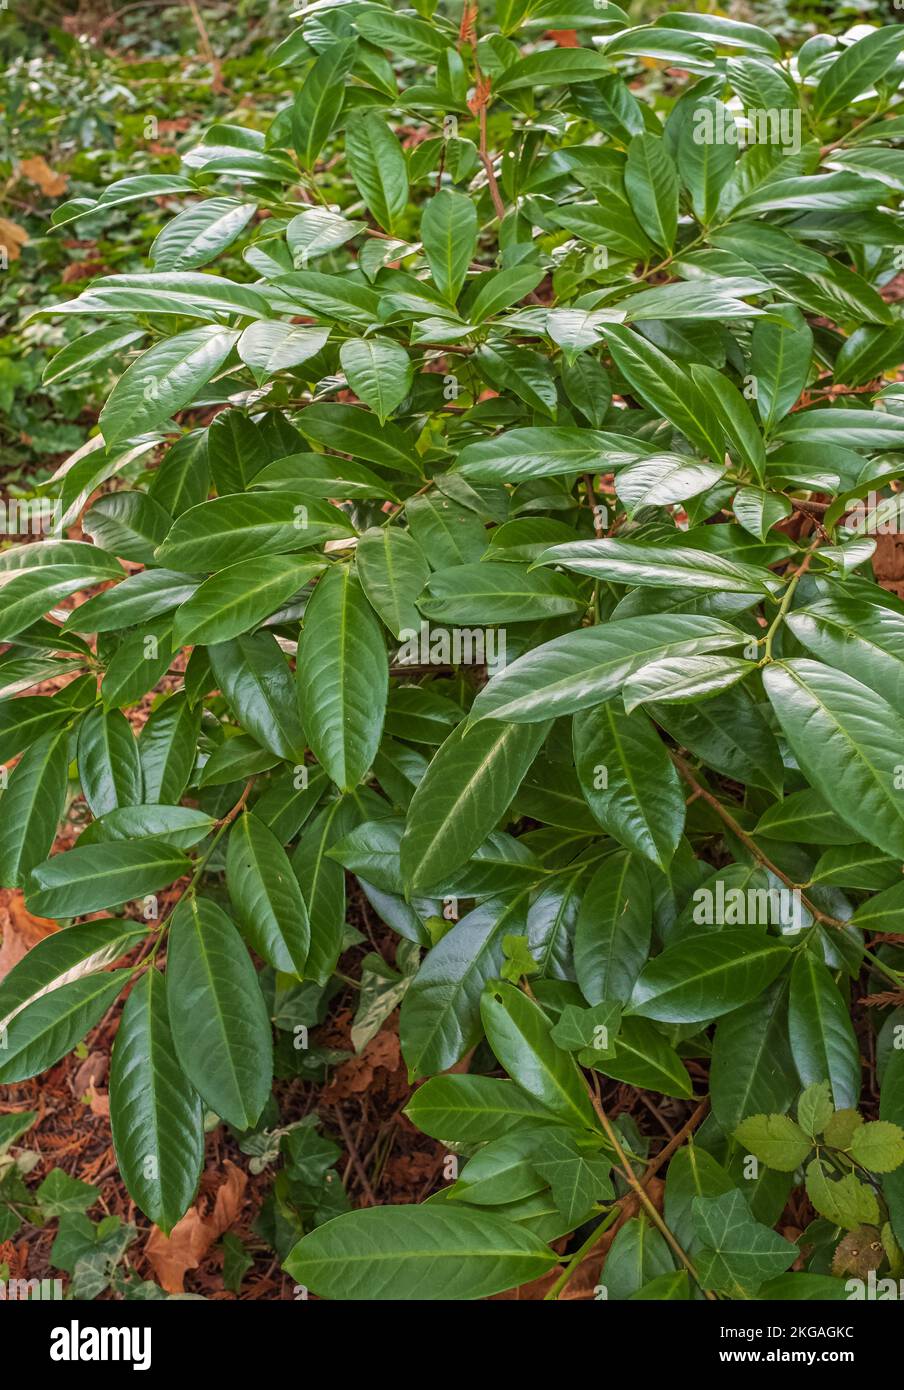 Close up of cherry laurel leaves. Evergreen cherry laurel plant as a natural background. Prunus laurocerasus, English laurel in North America, is an e Stock Photo